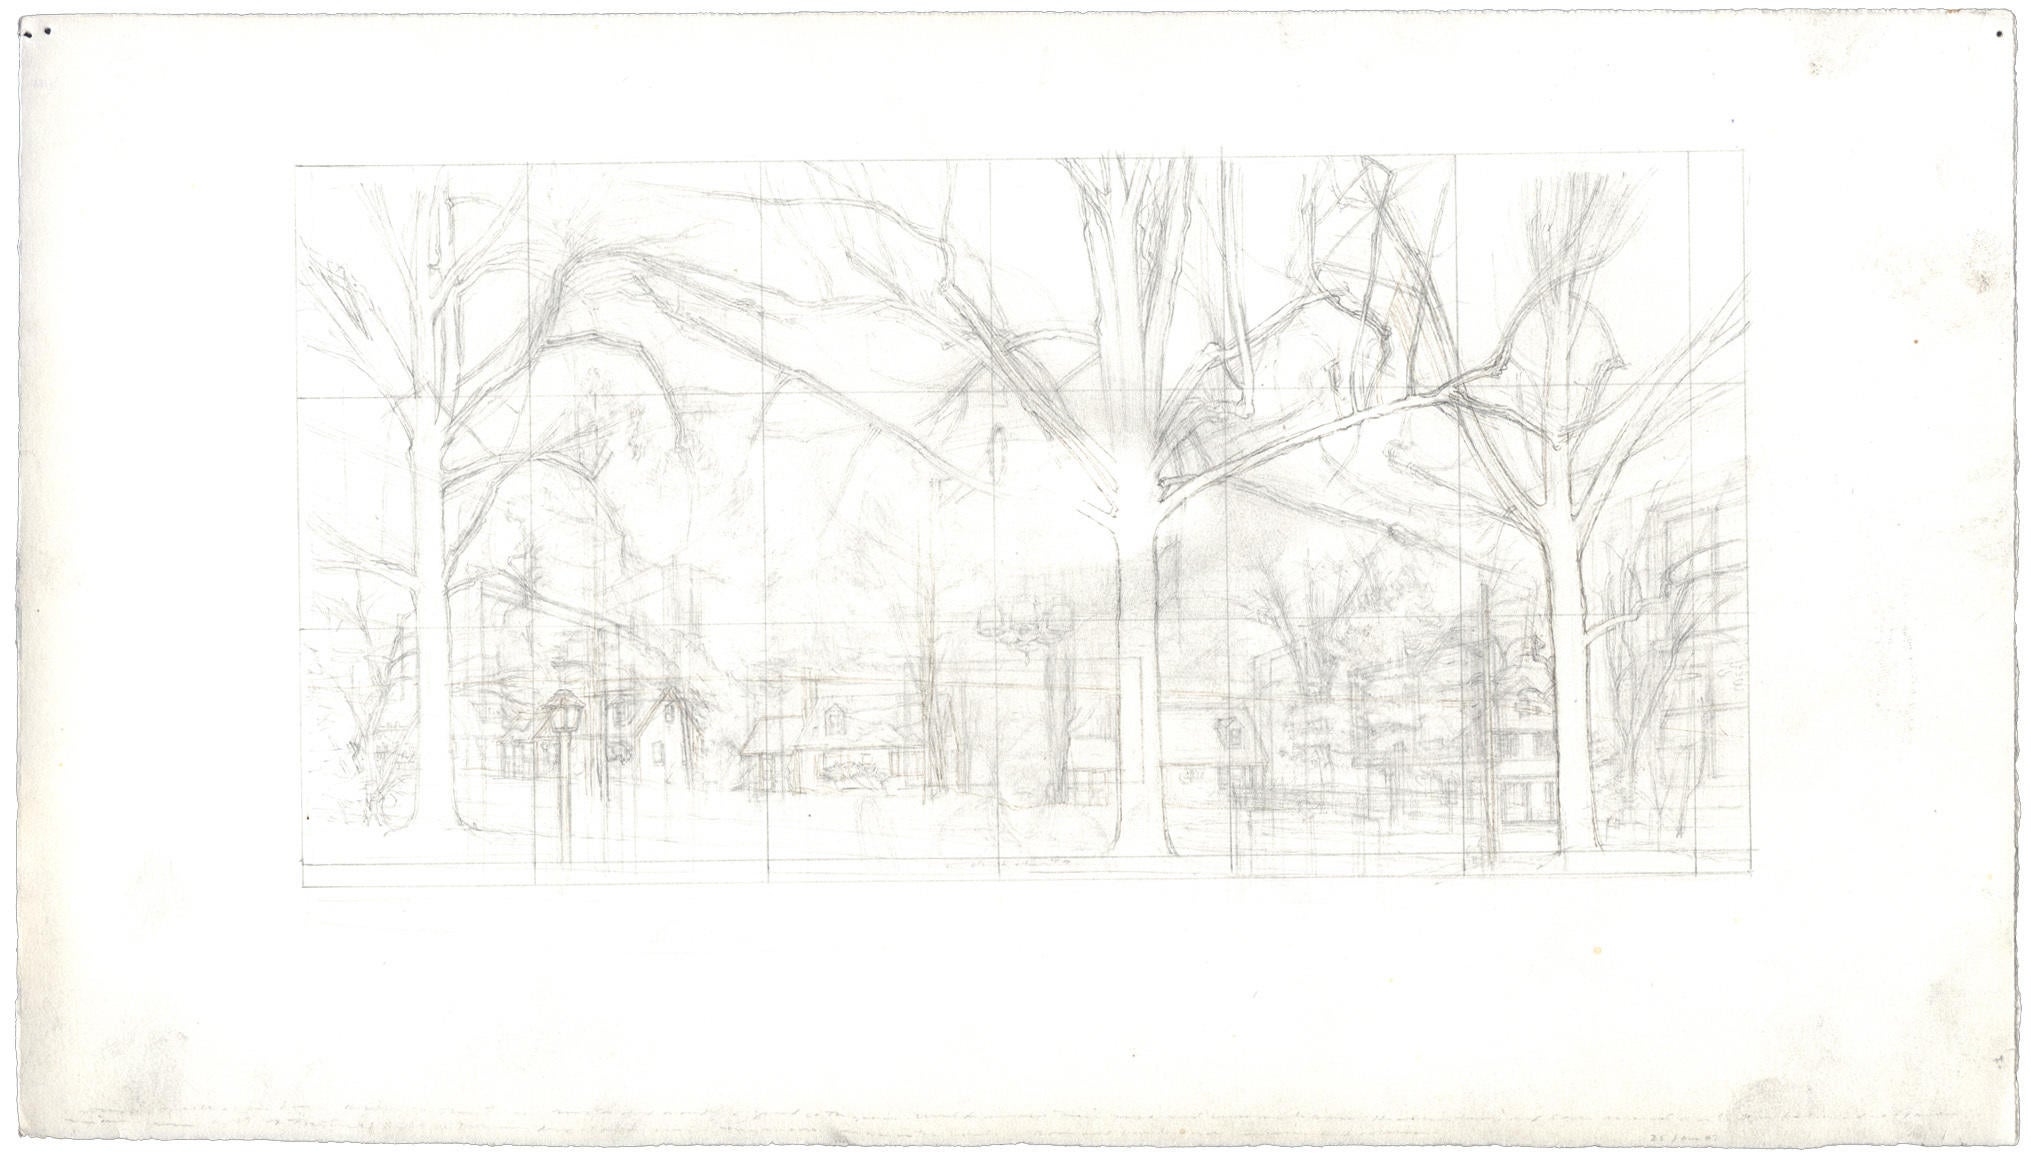 Study for Interior/Exterior: 25 January 1987 image